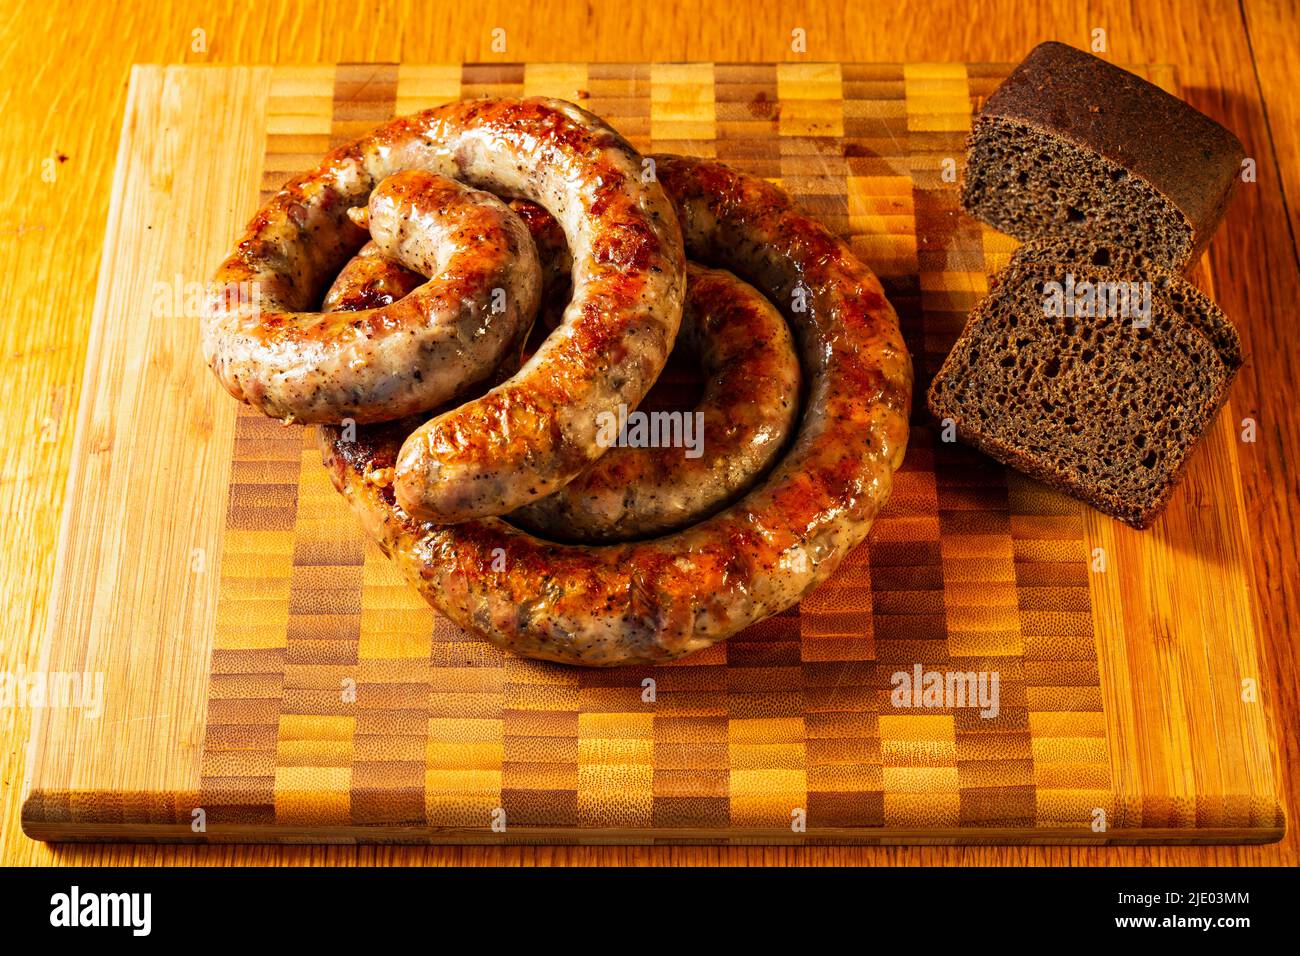 grilled sausages on a cutting board with bread. Stock Photo